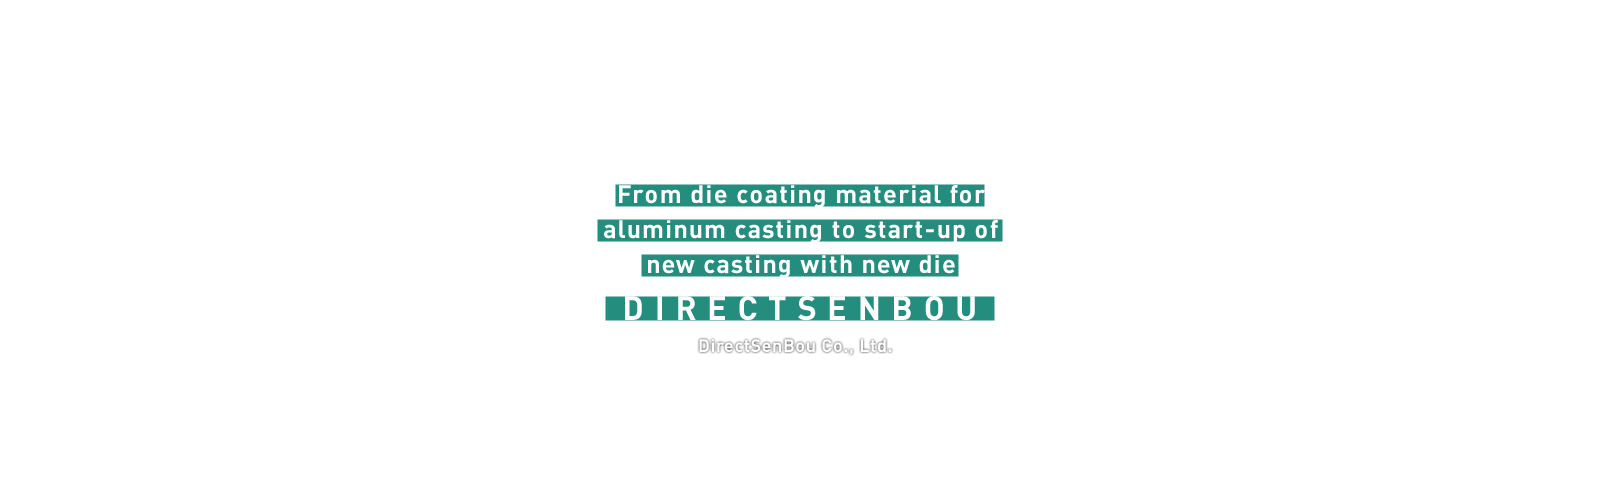 From die coating material for aluminum casting to start-up of new casting with new die